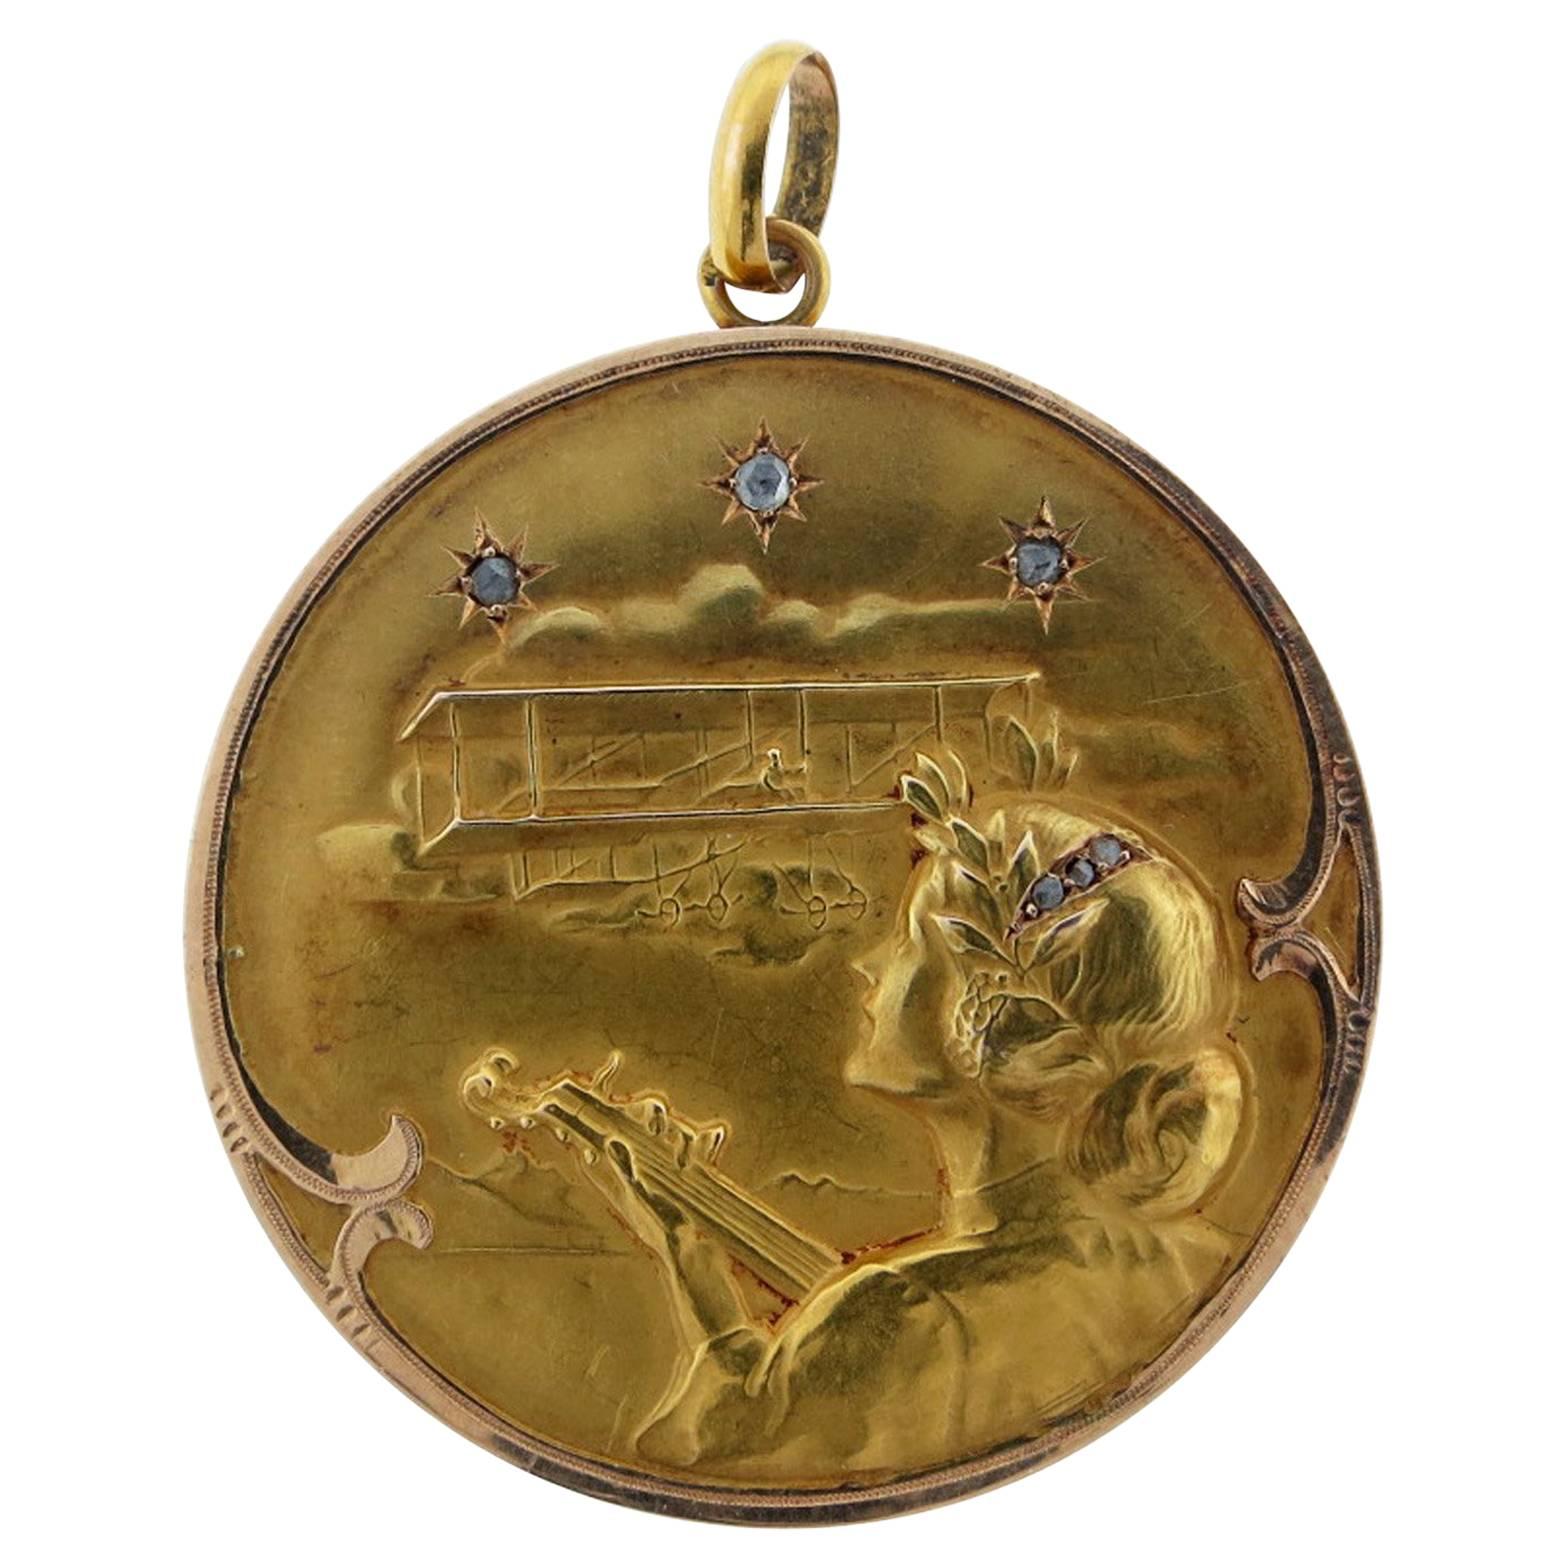  Rare Antique French Gold Locket Depicting the Wright Brothers Arrival In Paris 